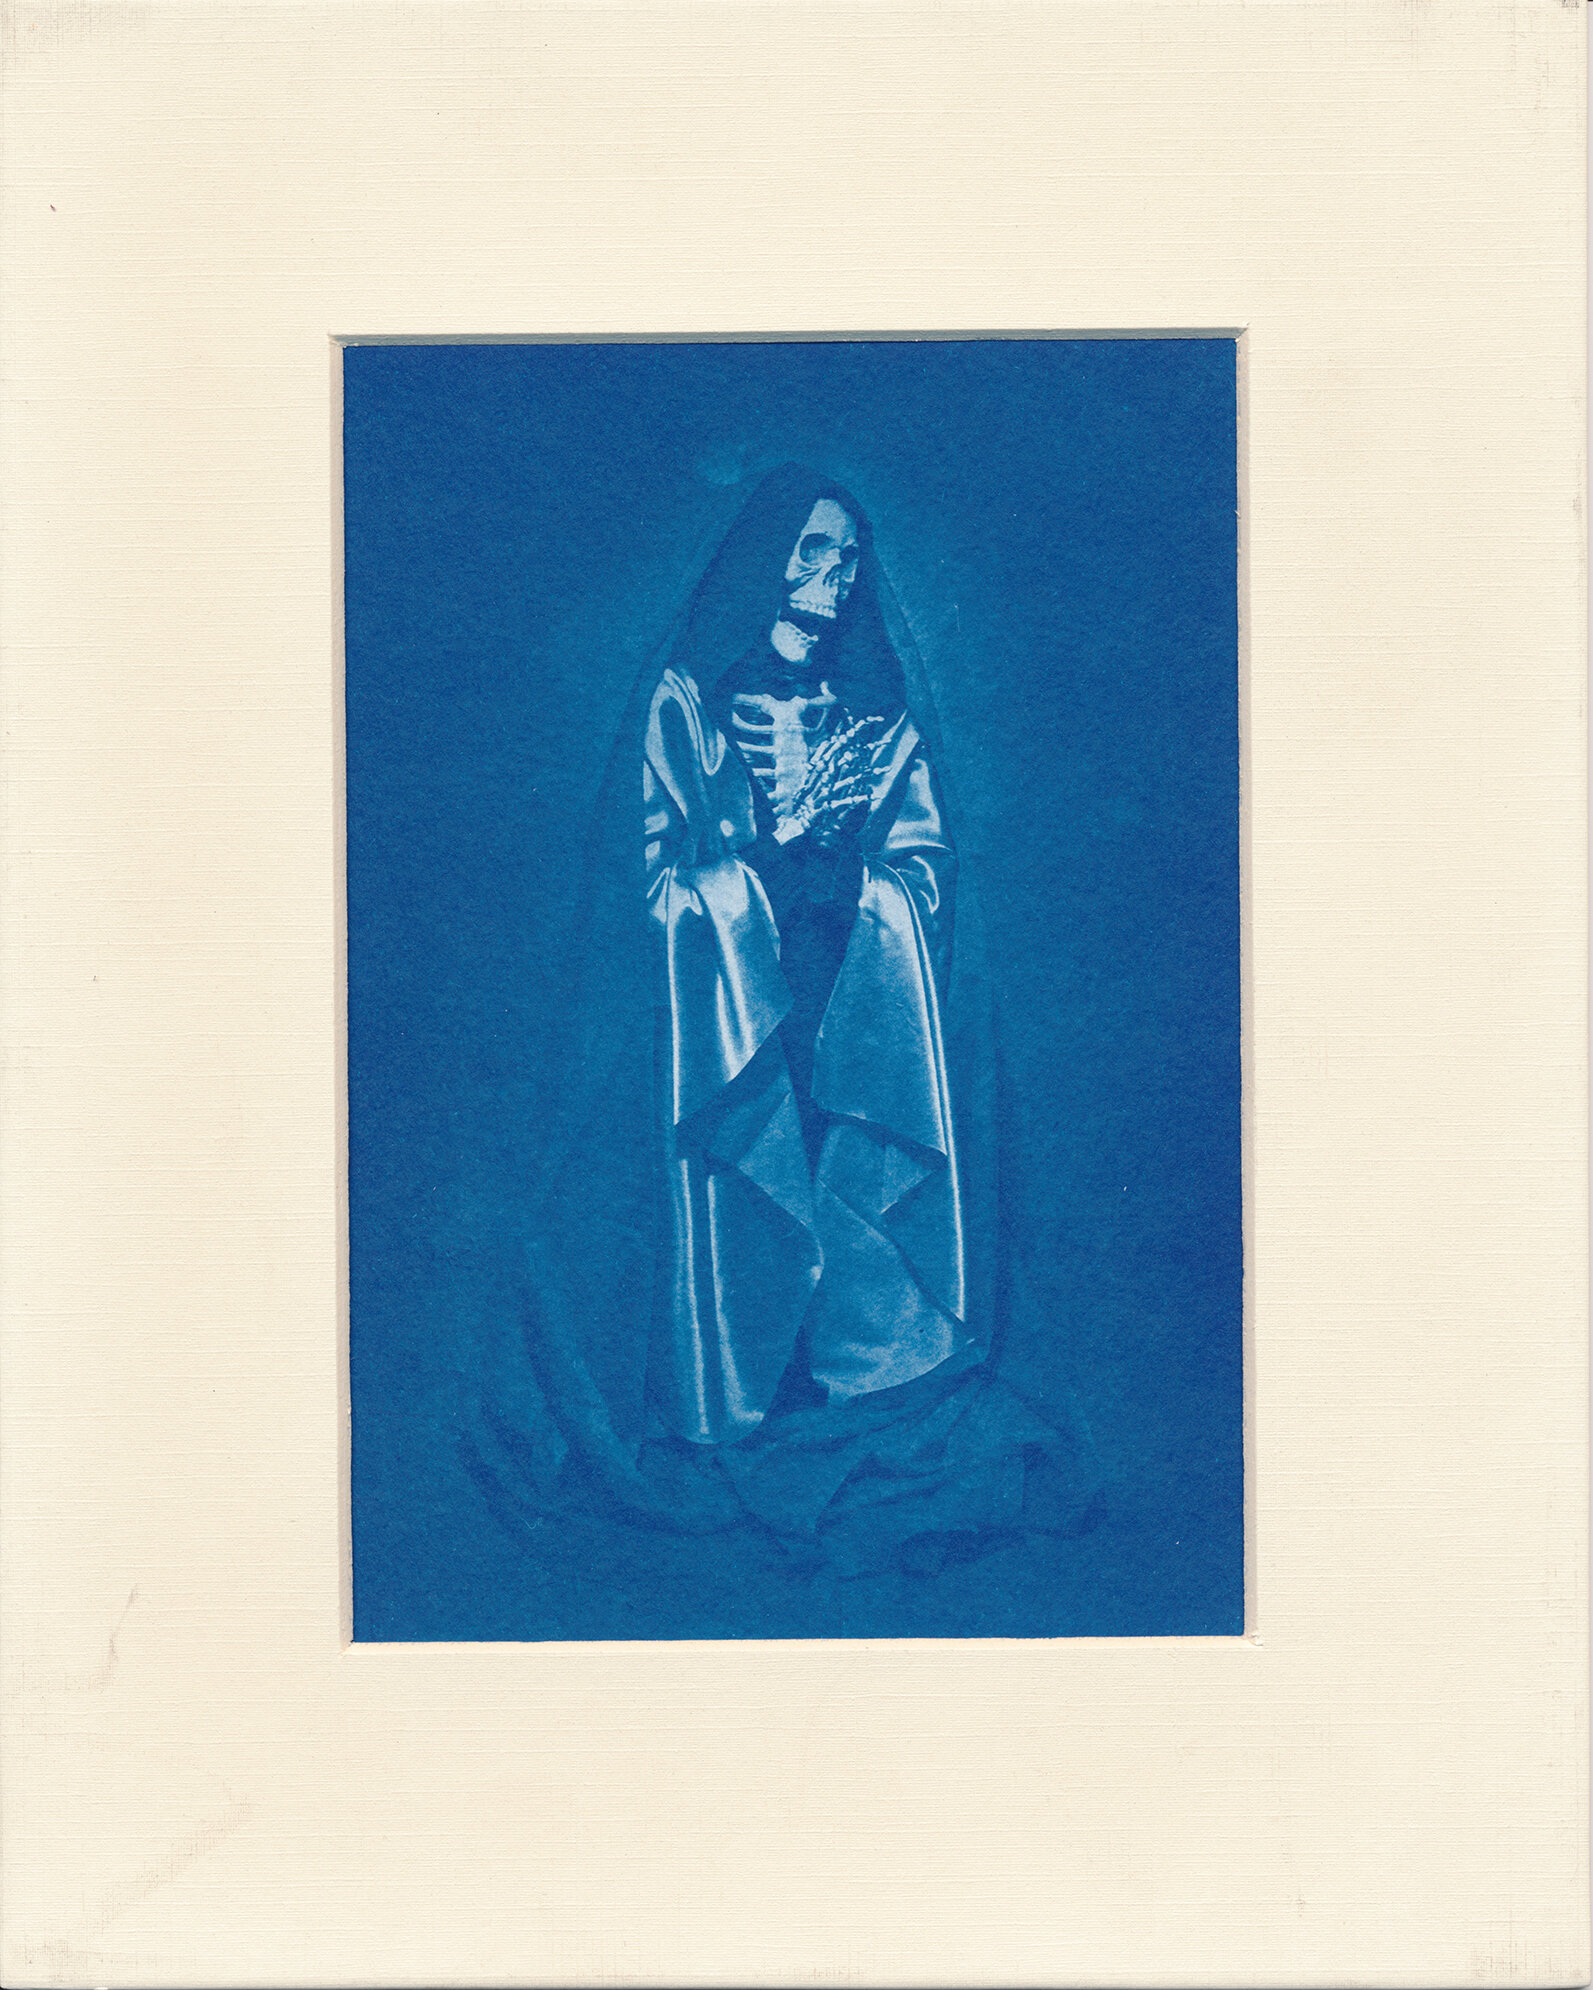  After the Holy Virgin  2015  Cyanotype  5x7 